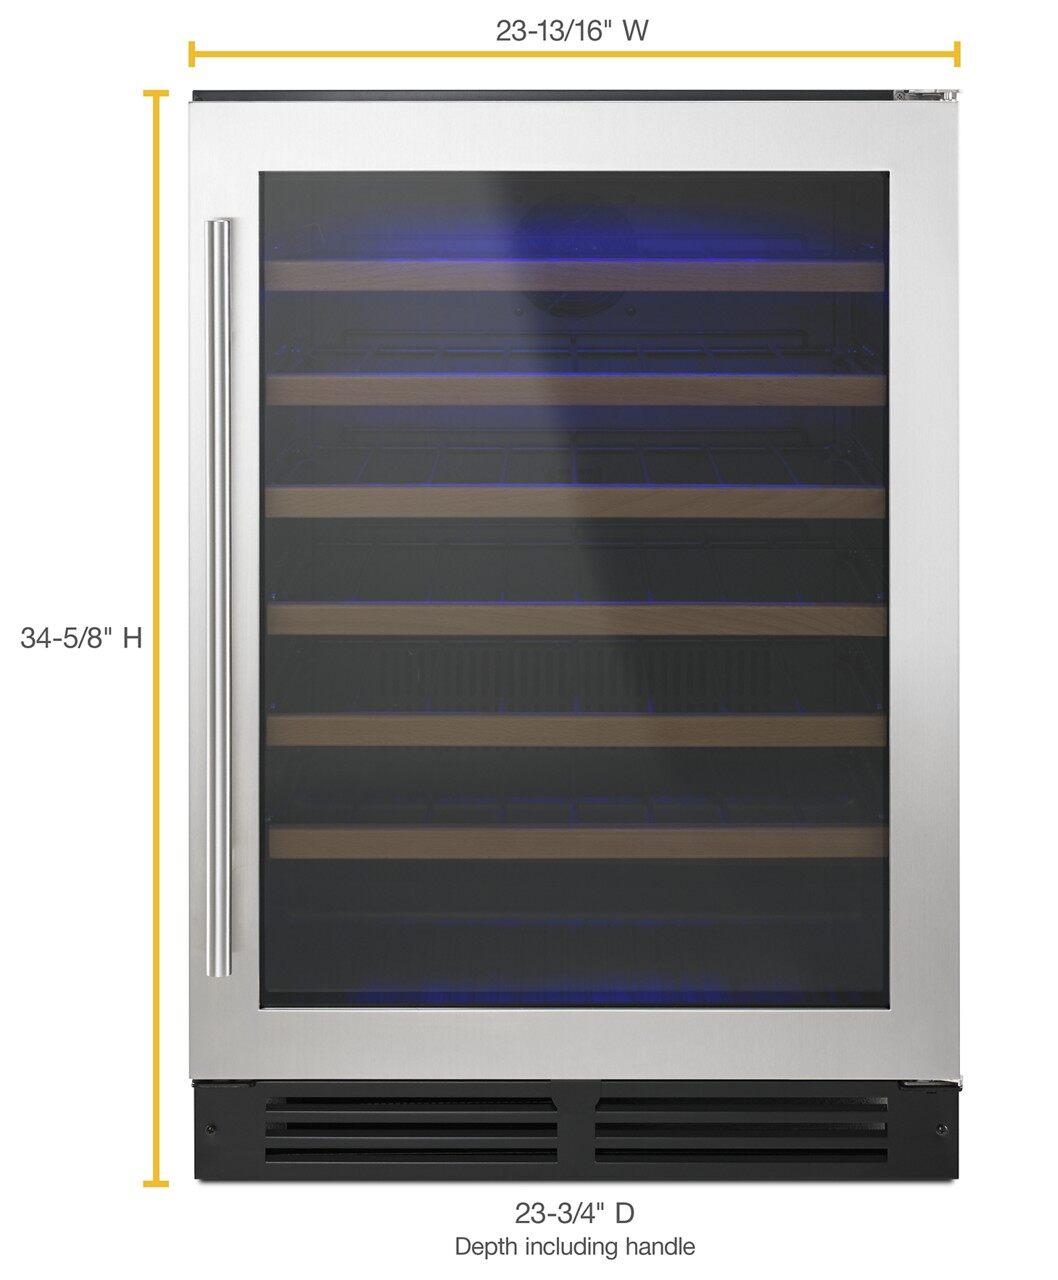 Whirlpool - 23.8125 Inch 24 Inch cu. ft Wine Center Refrigerator in Stainless - WUW35X24DS